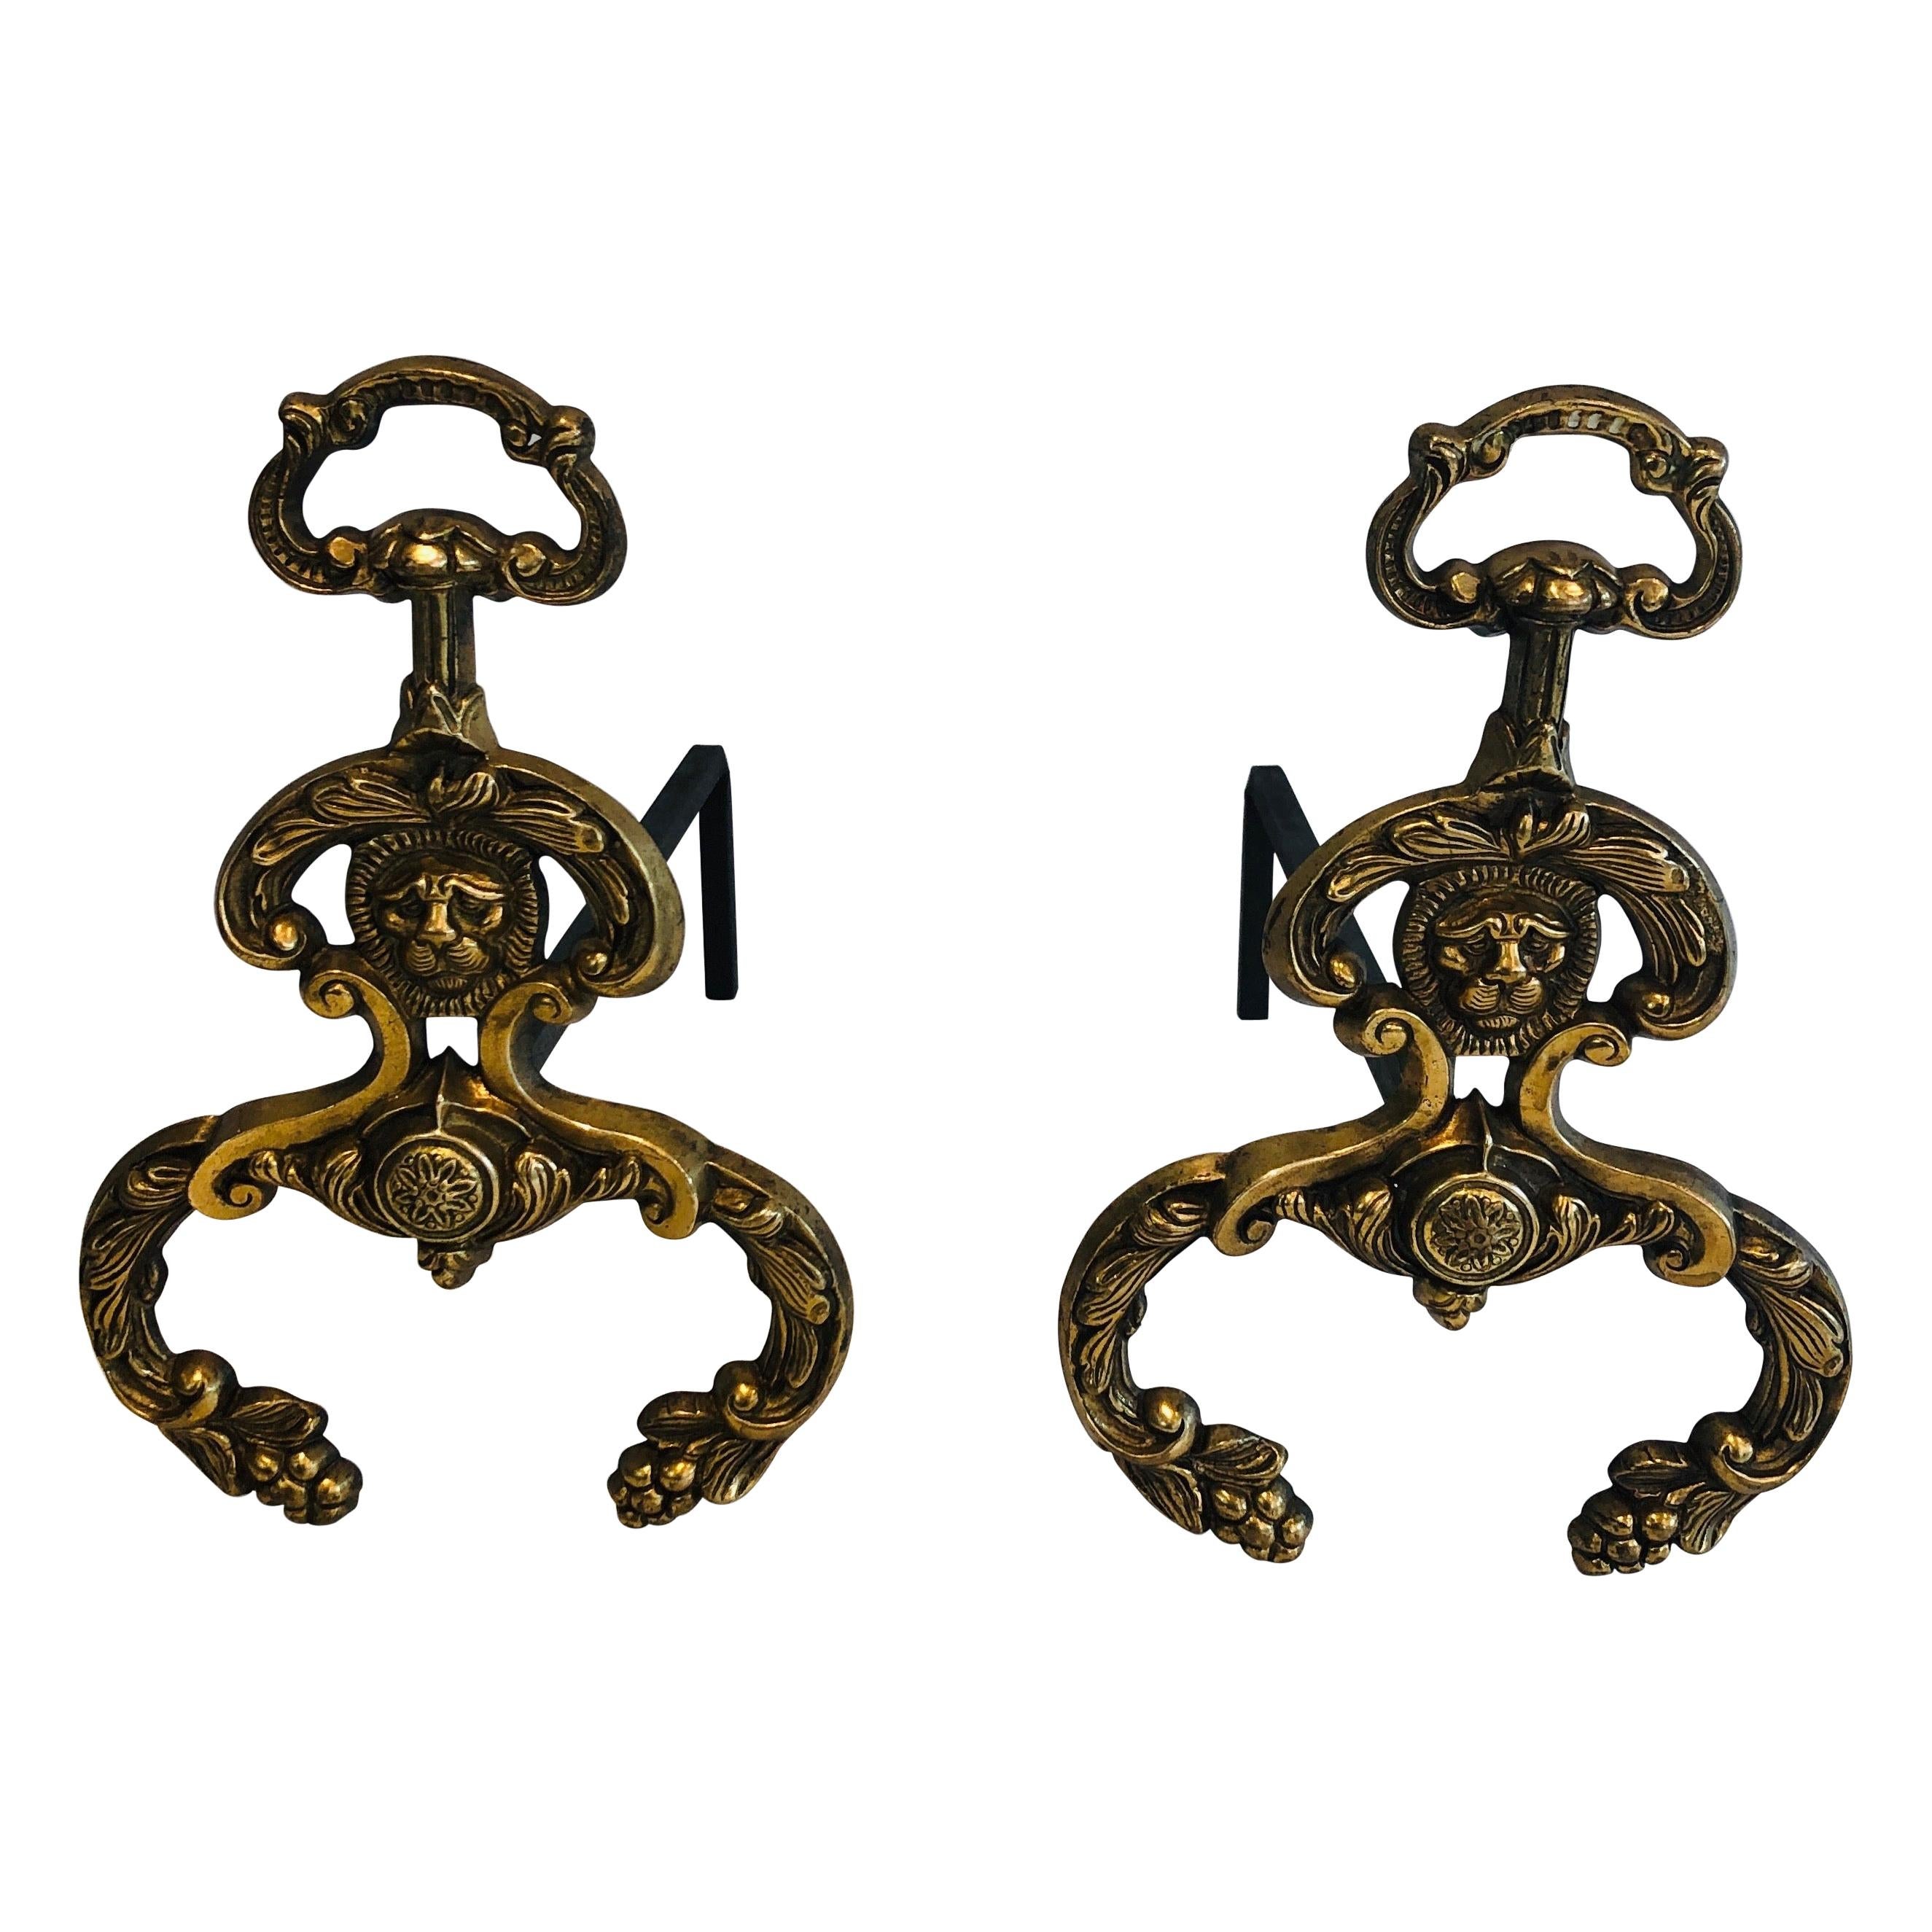 Pair of Neoclassical Style Bronze and Wrought IronAndirons with Lions Faces. F